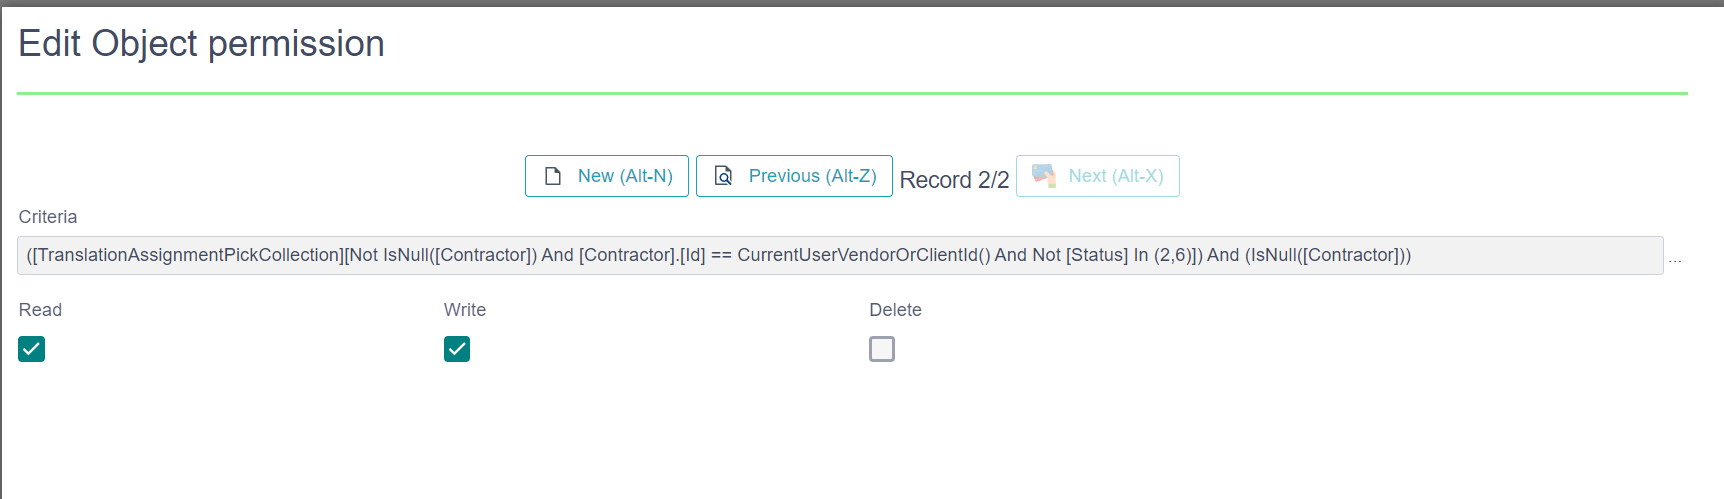 Screenshot of Trados Studio displaying Edit Object permission for Translation assignment with criteria and Read and Write permissions checked.